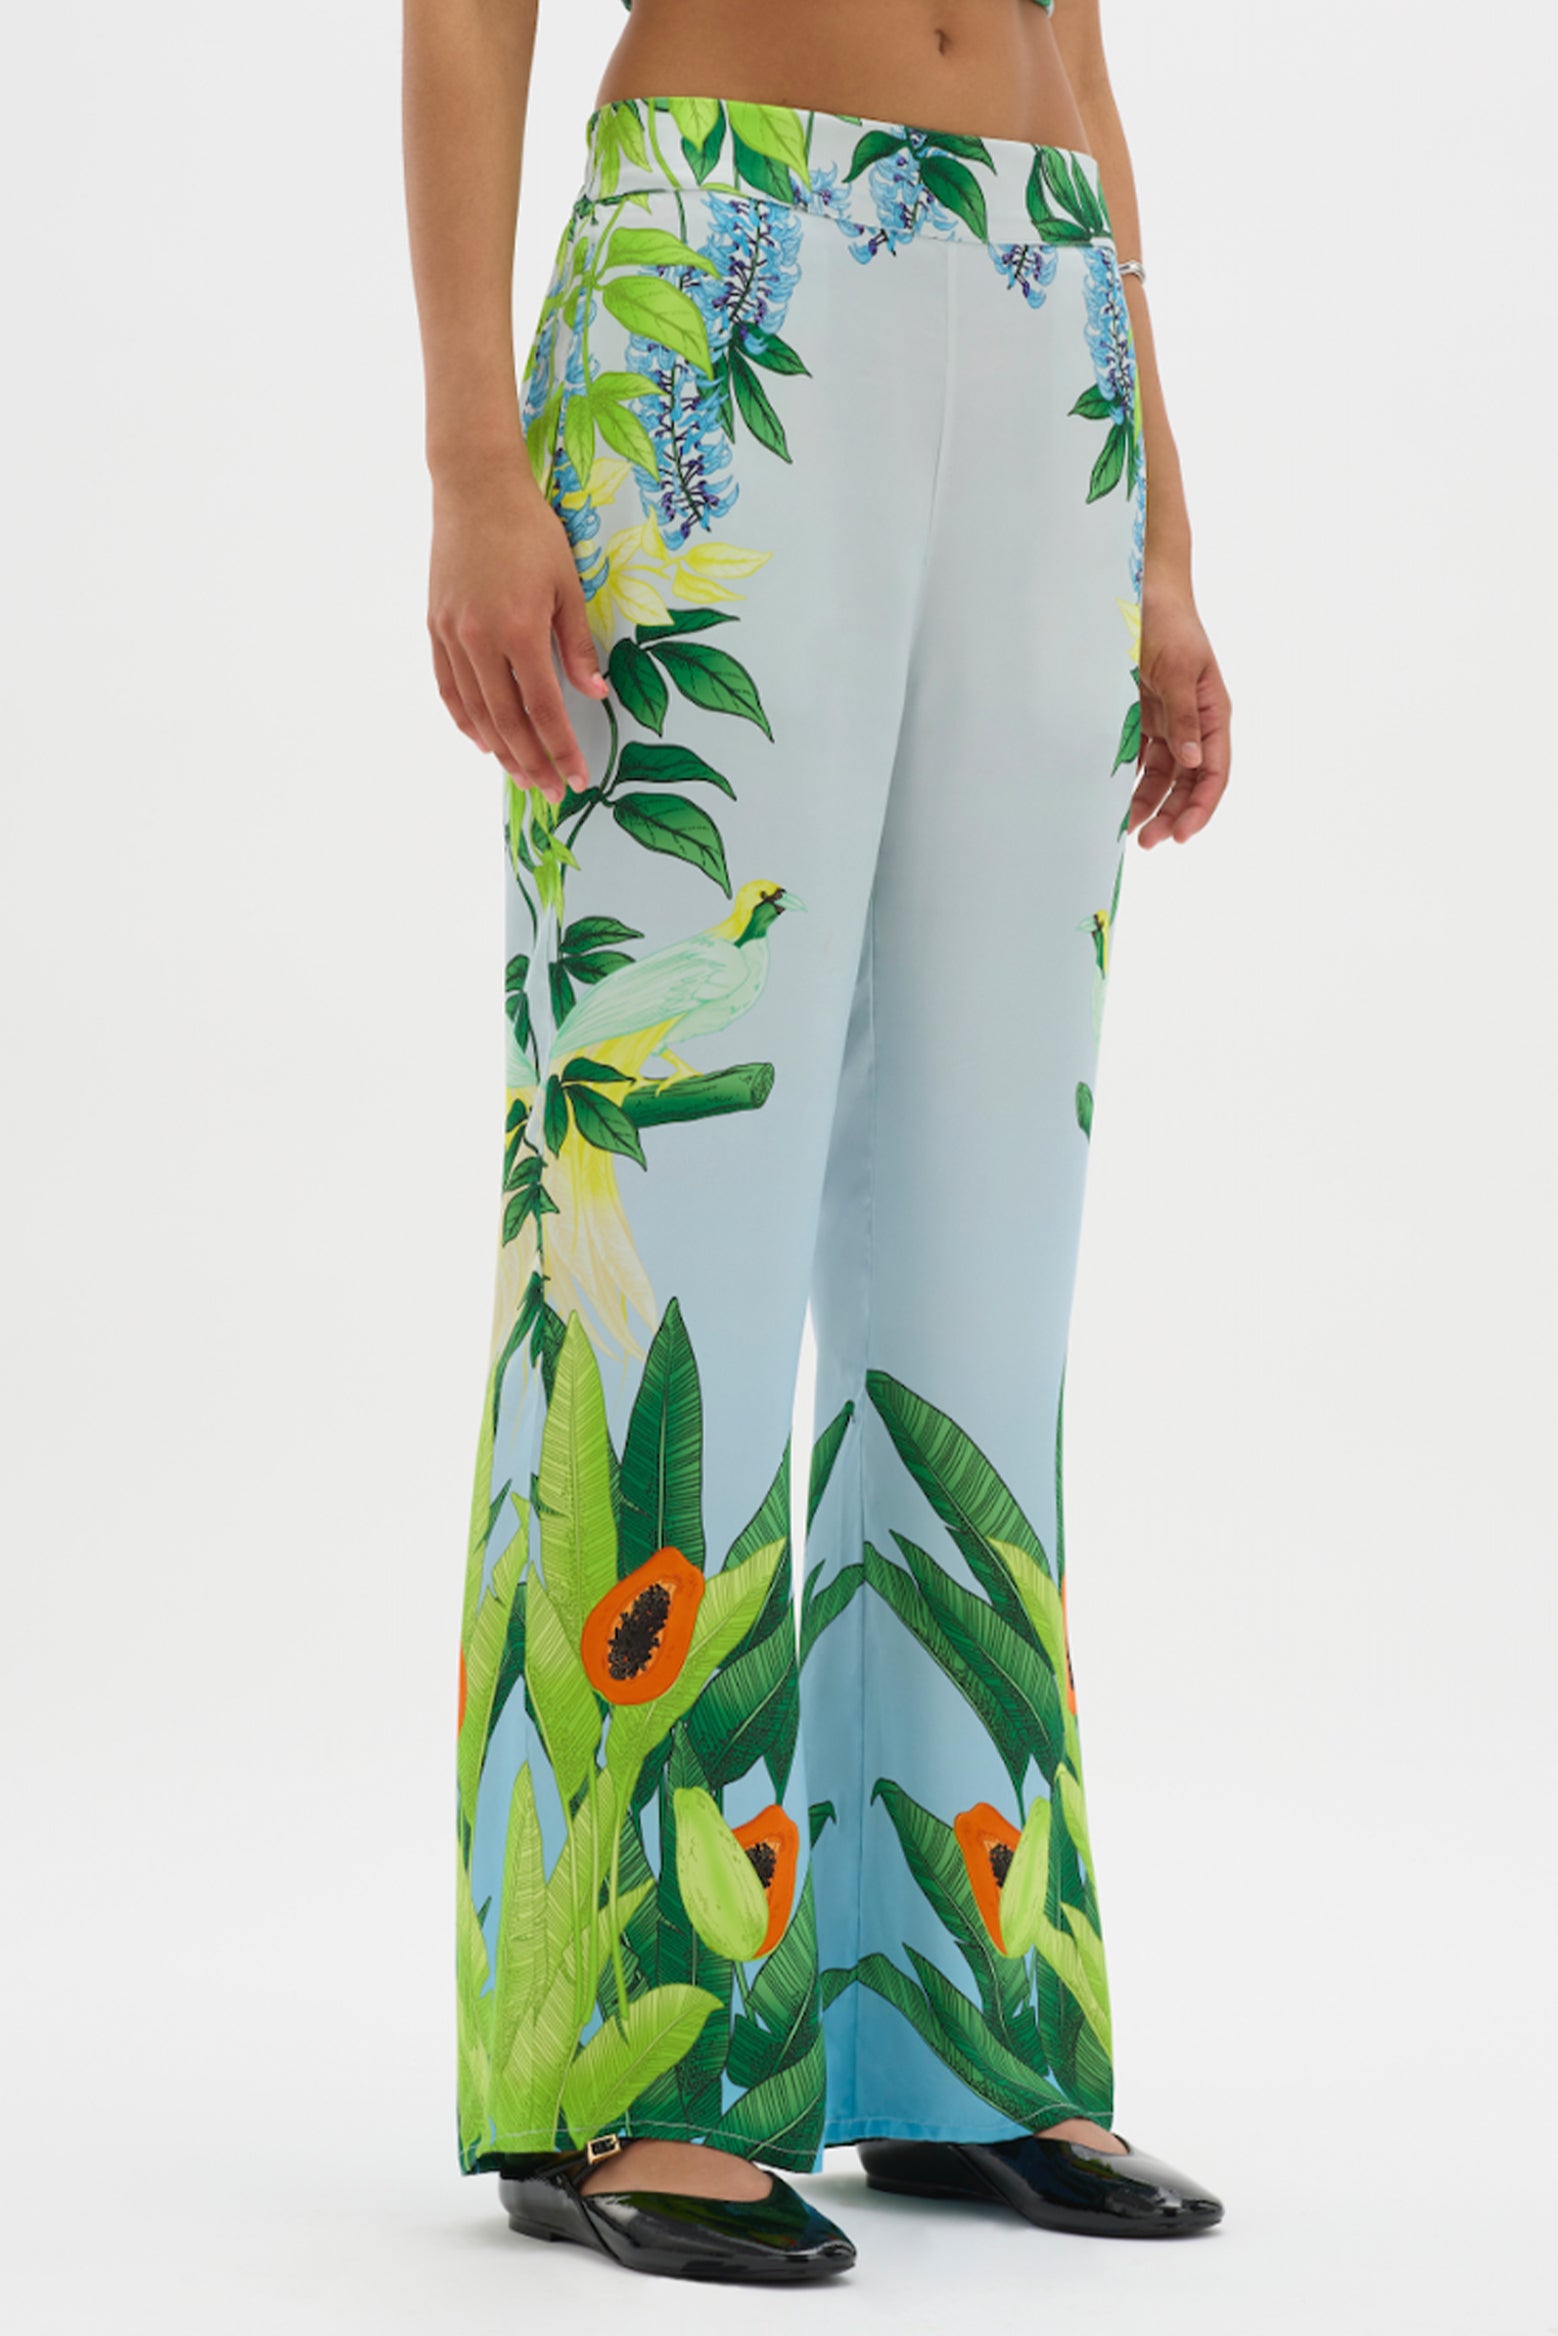 Muma World Eden Illustrated Pant in Blue available at The New Trend Australia.